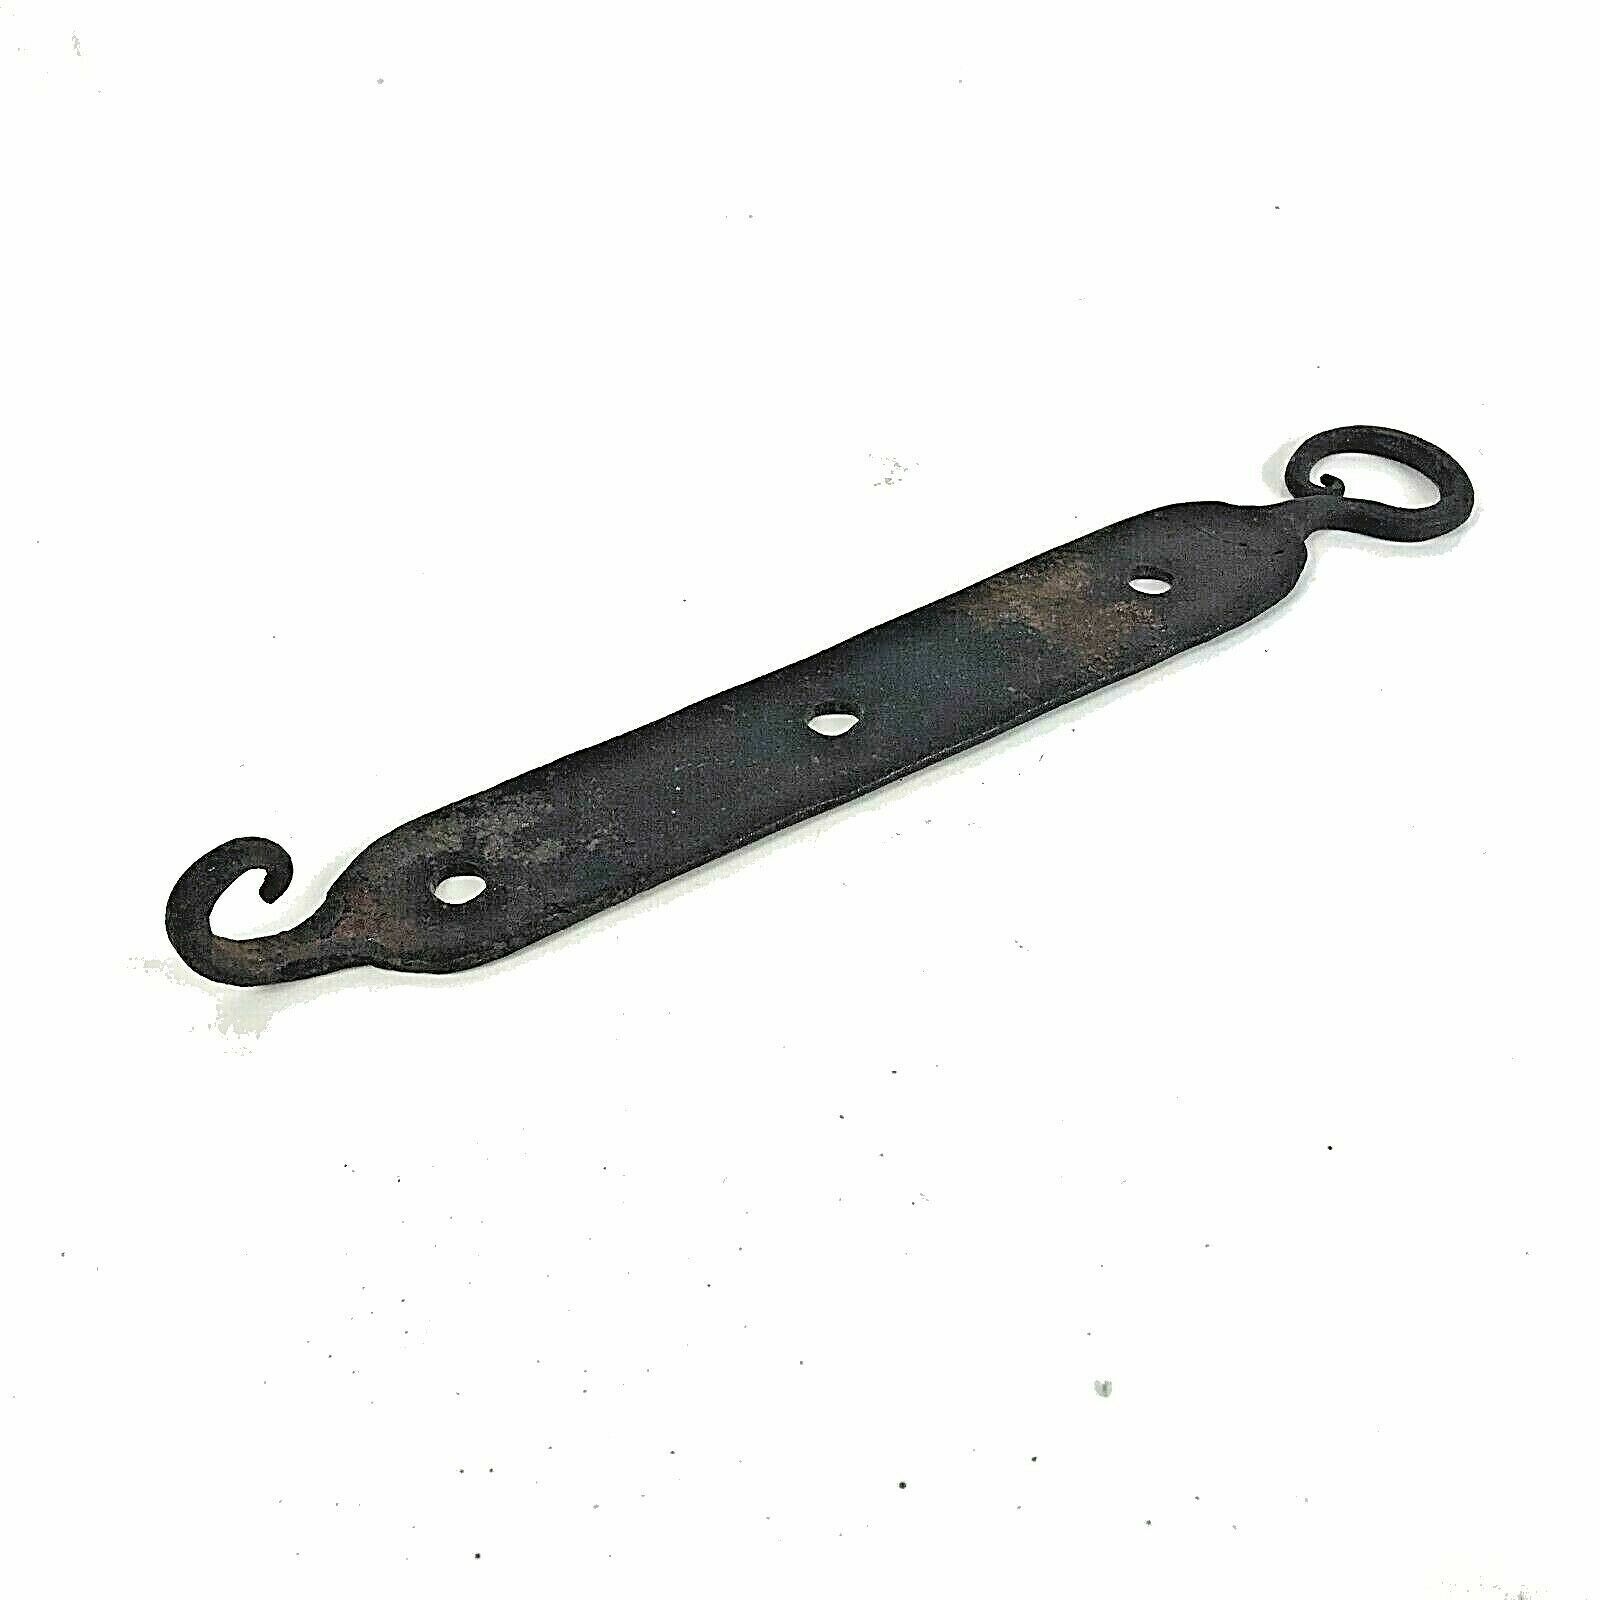 Nice early Circa 1800 Forged Iron Hanger Hook Lock Lever